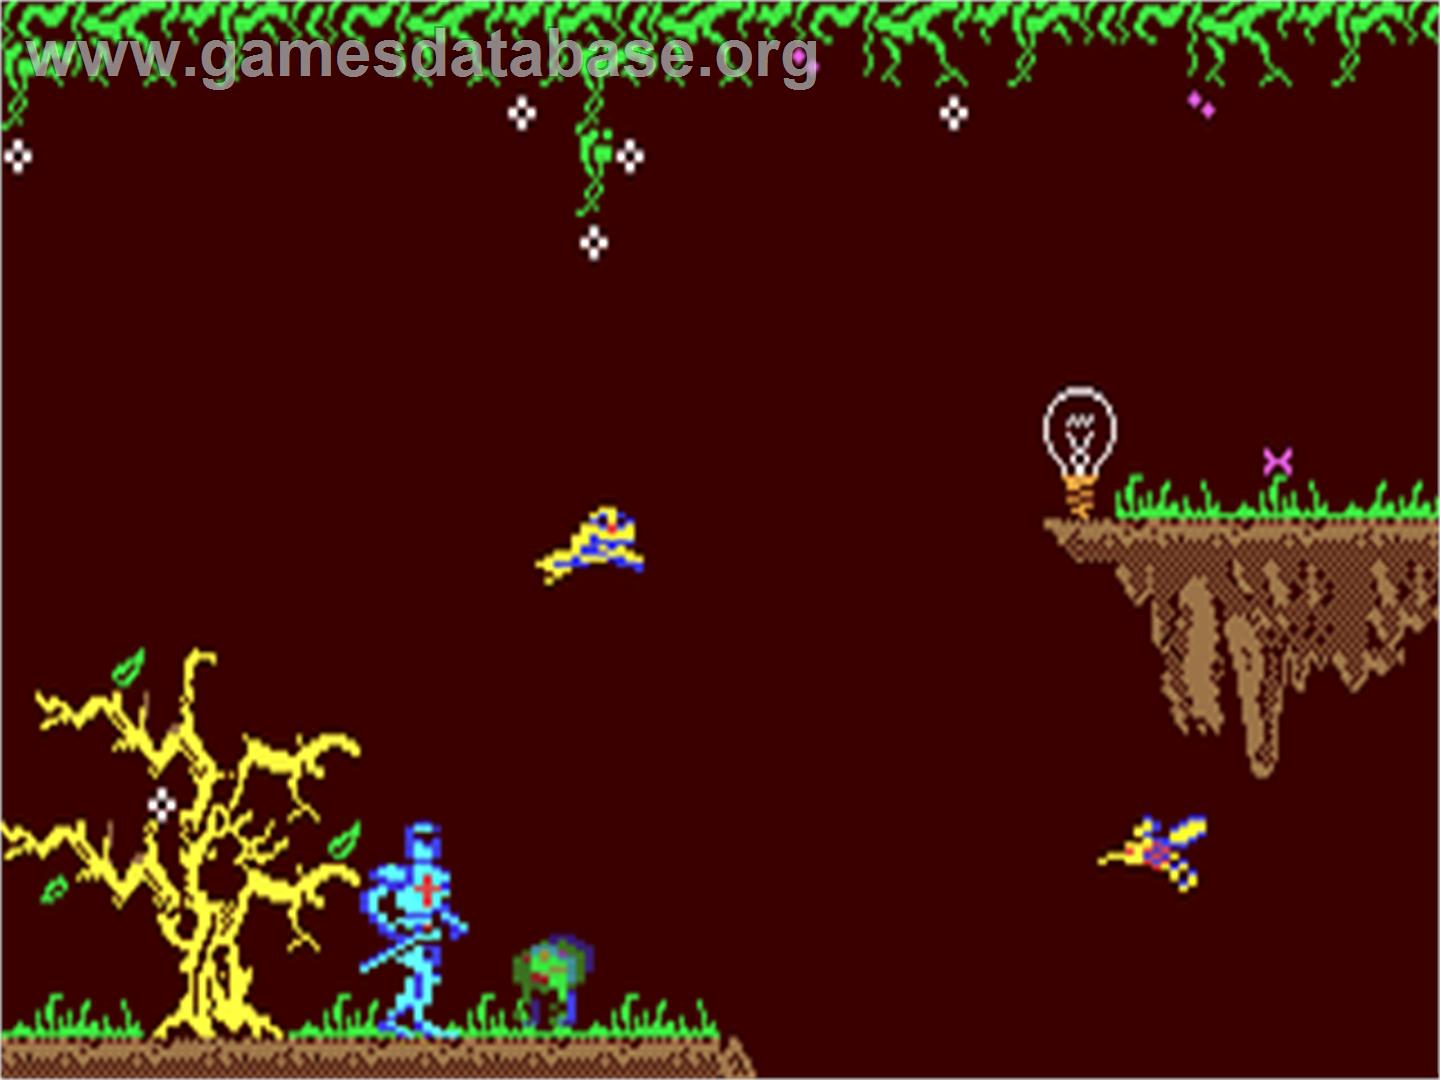 Camelot Warriors - Commodore 64 - Artwork - In Game